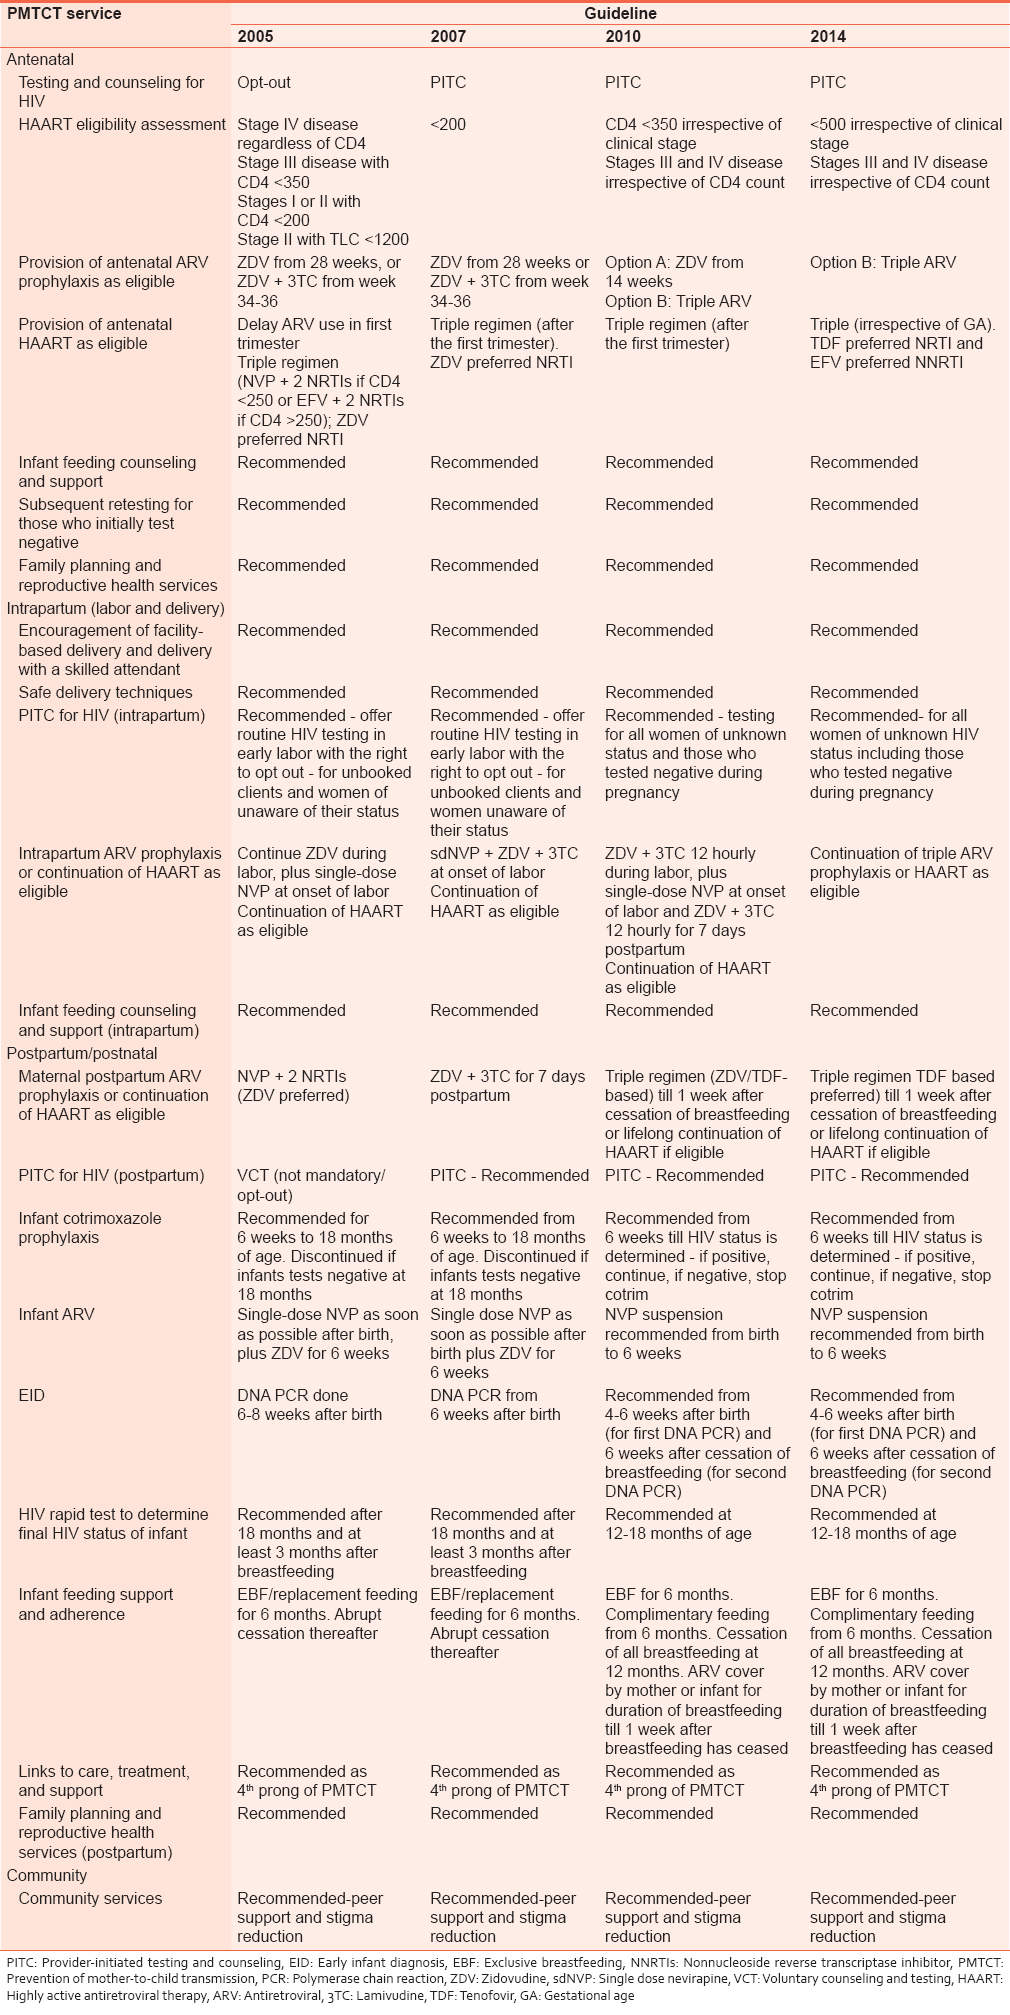 Table 1: Summary of key changes in national guidelines between 2005 and 2014 <sup>[10,11]</sup>